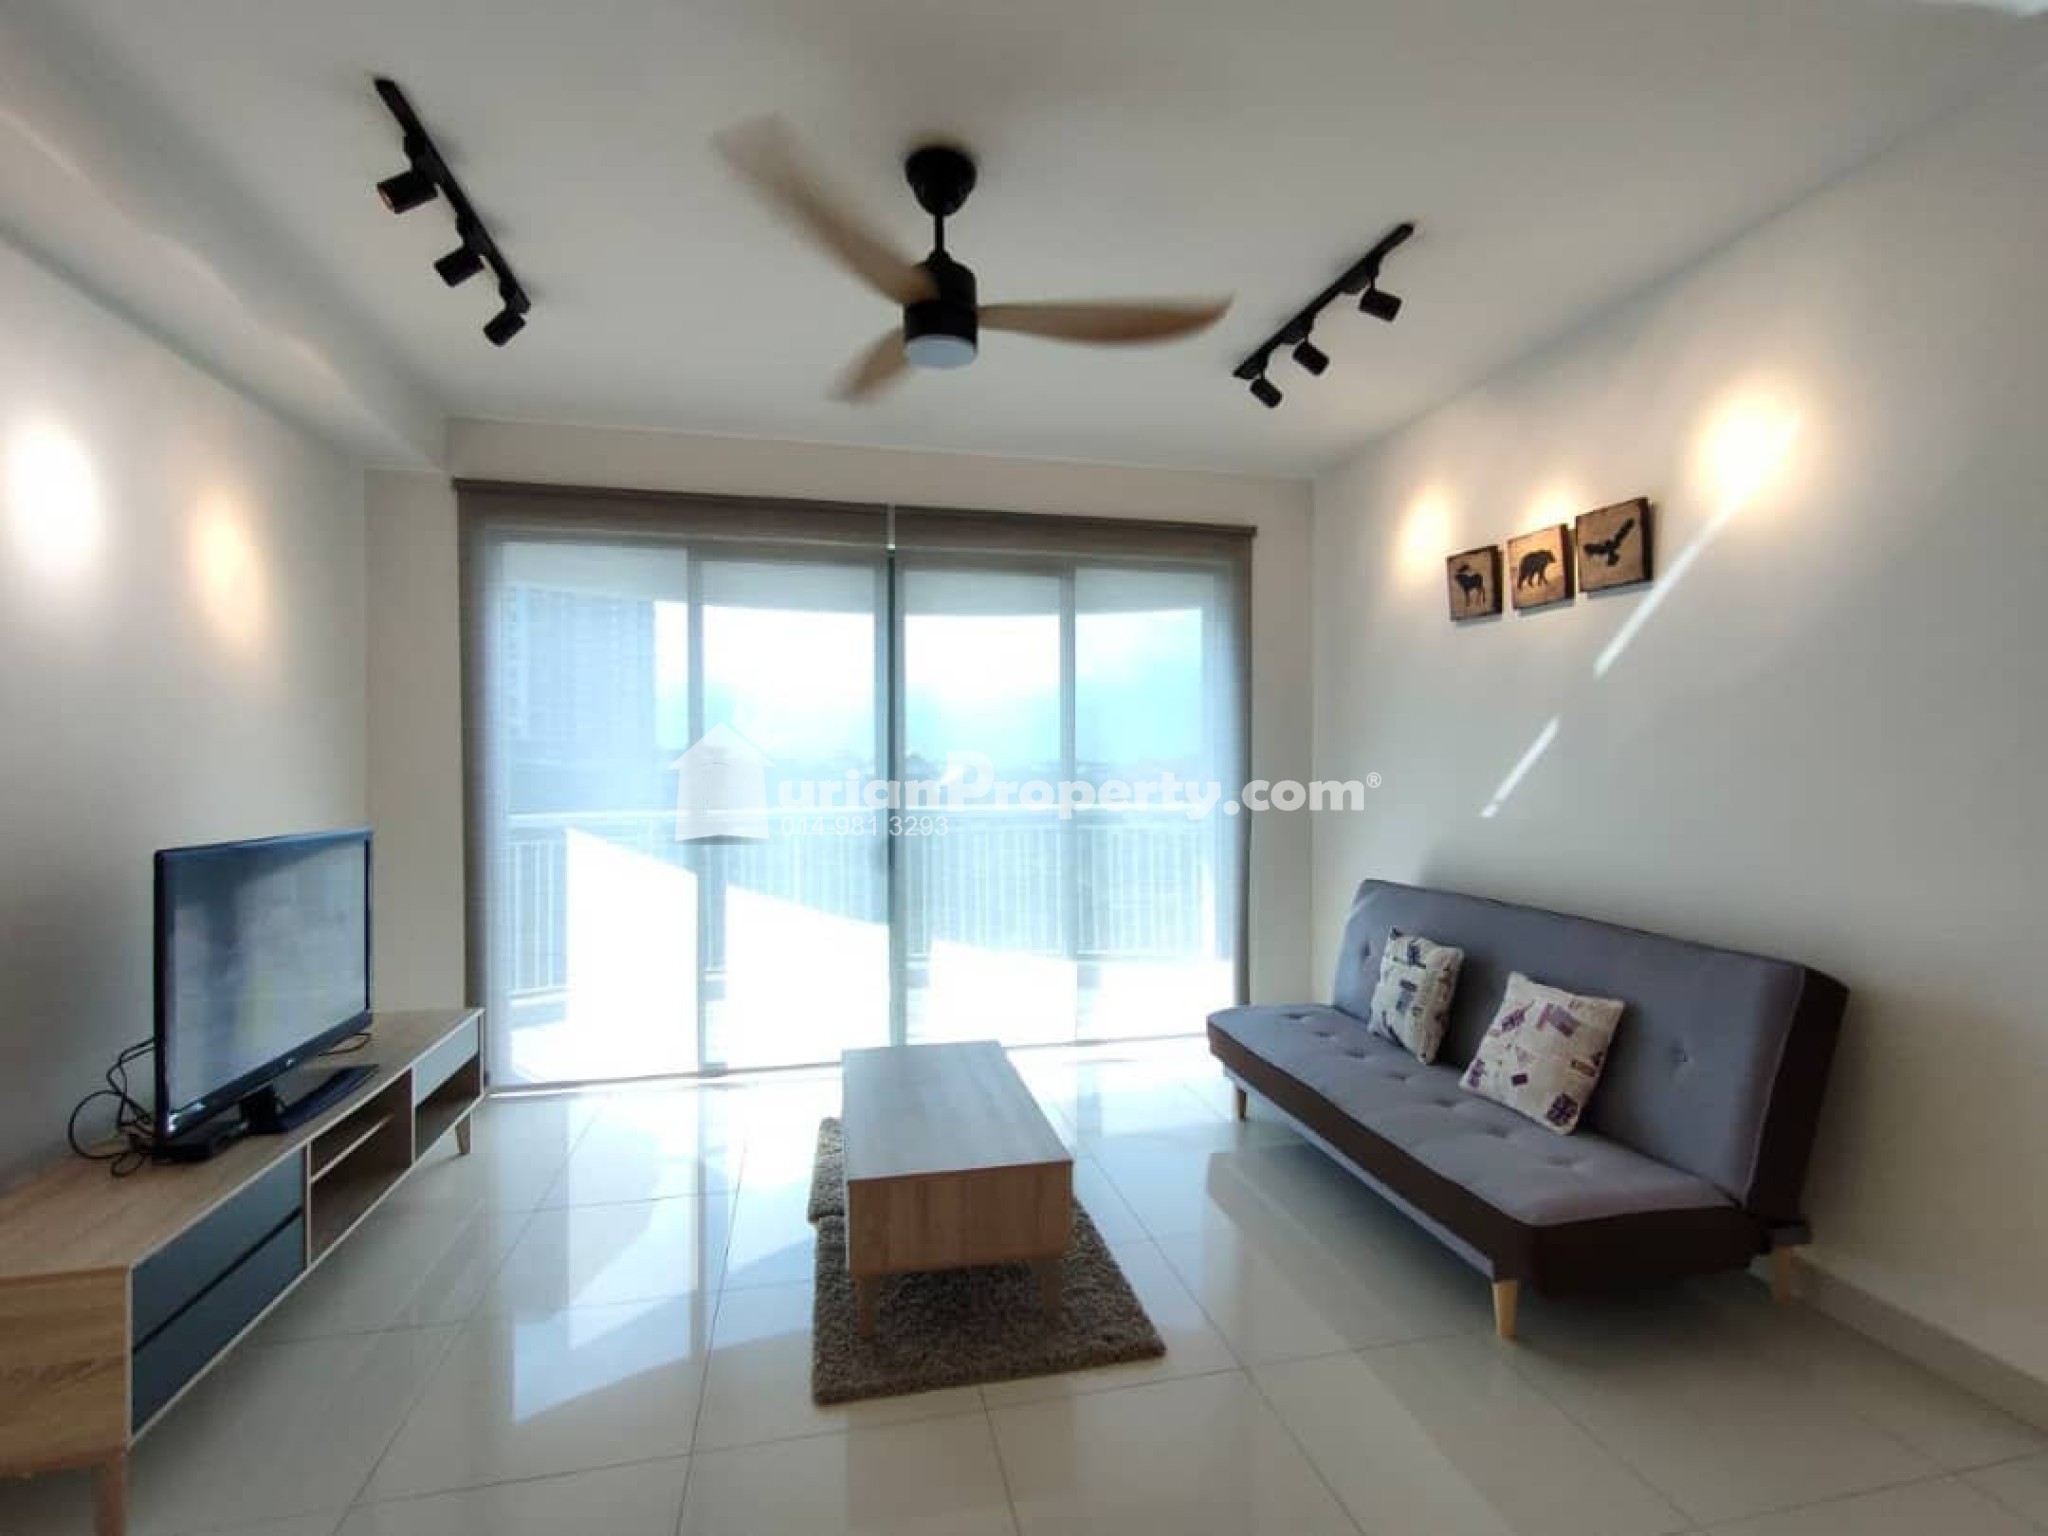 Condo For Sale at Teega Residence